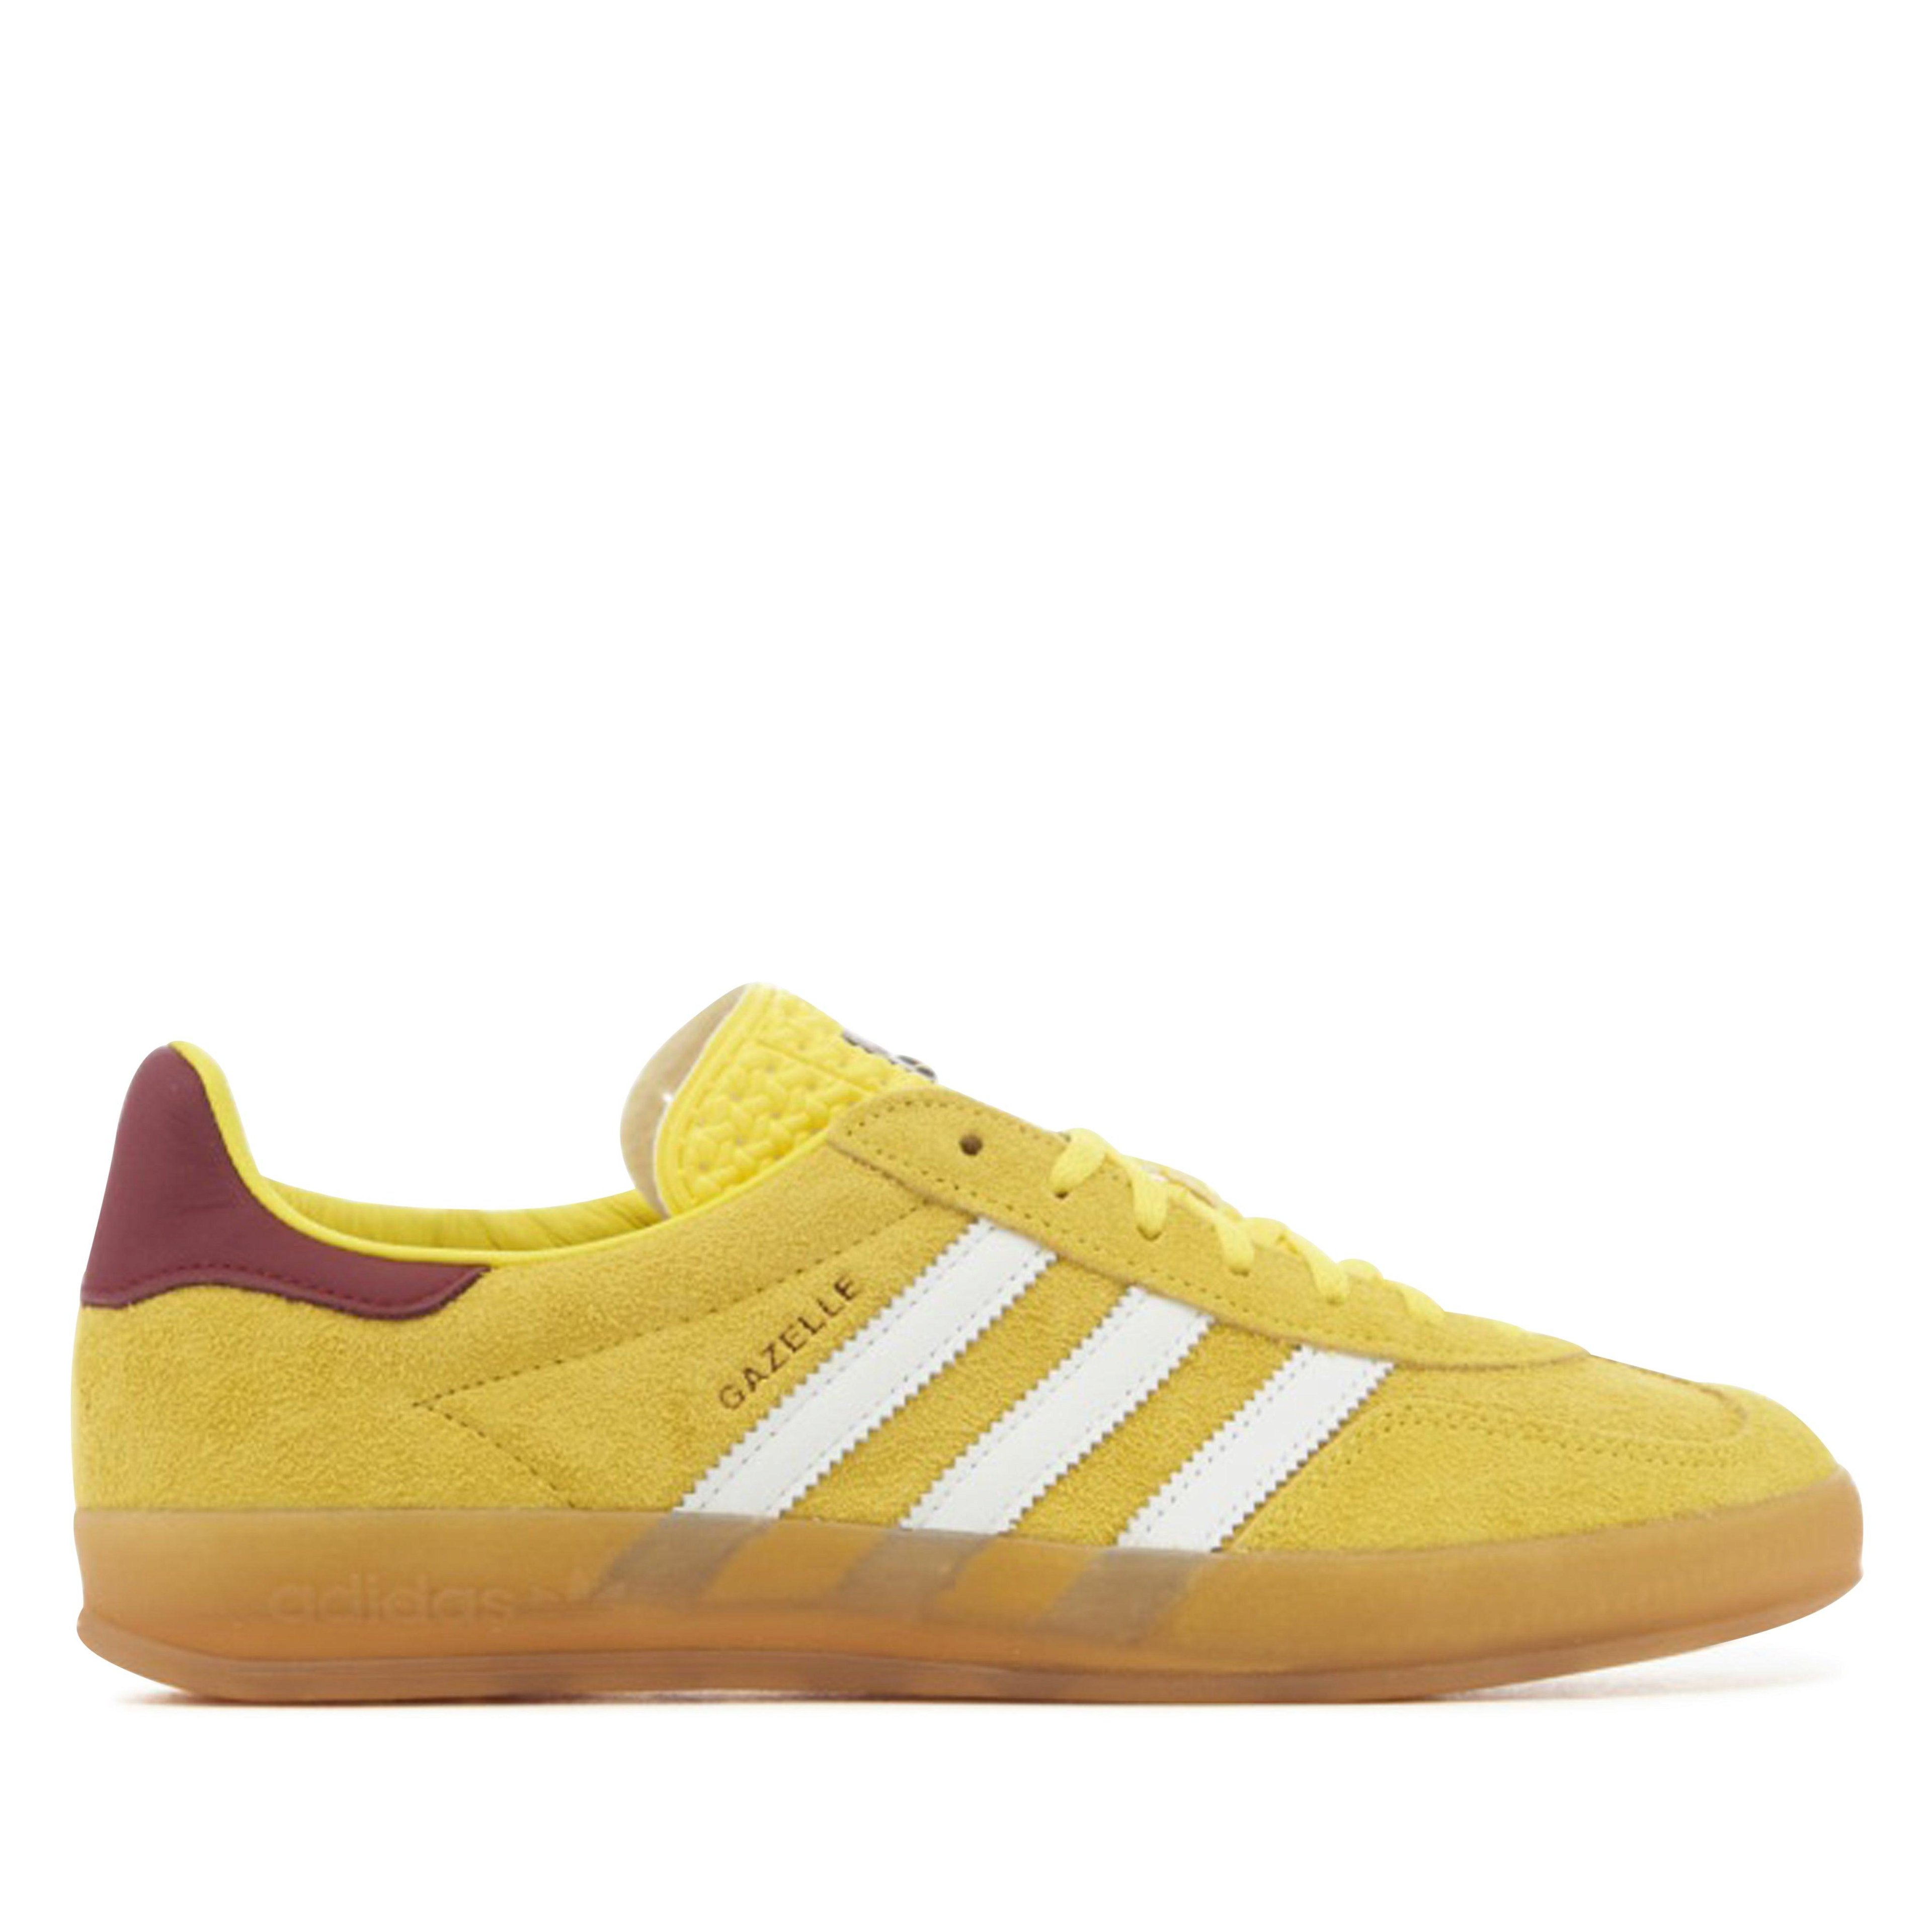 Adidas - Gazelle Indoor Sneakers - (Yellow) by ADIDAS